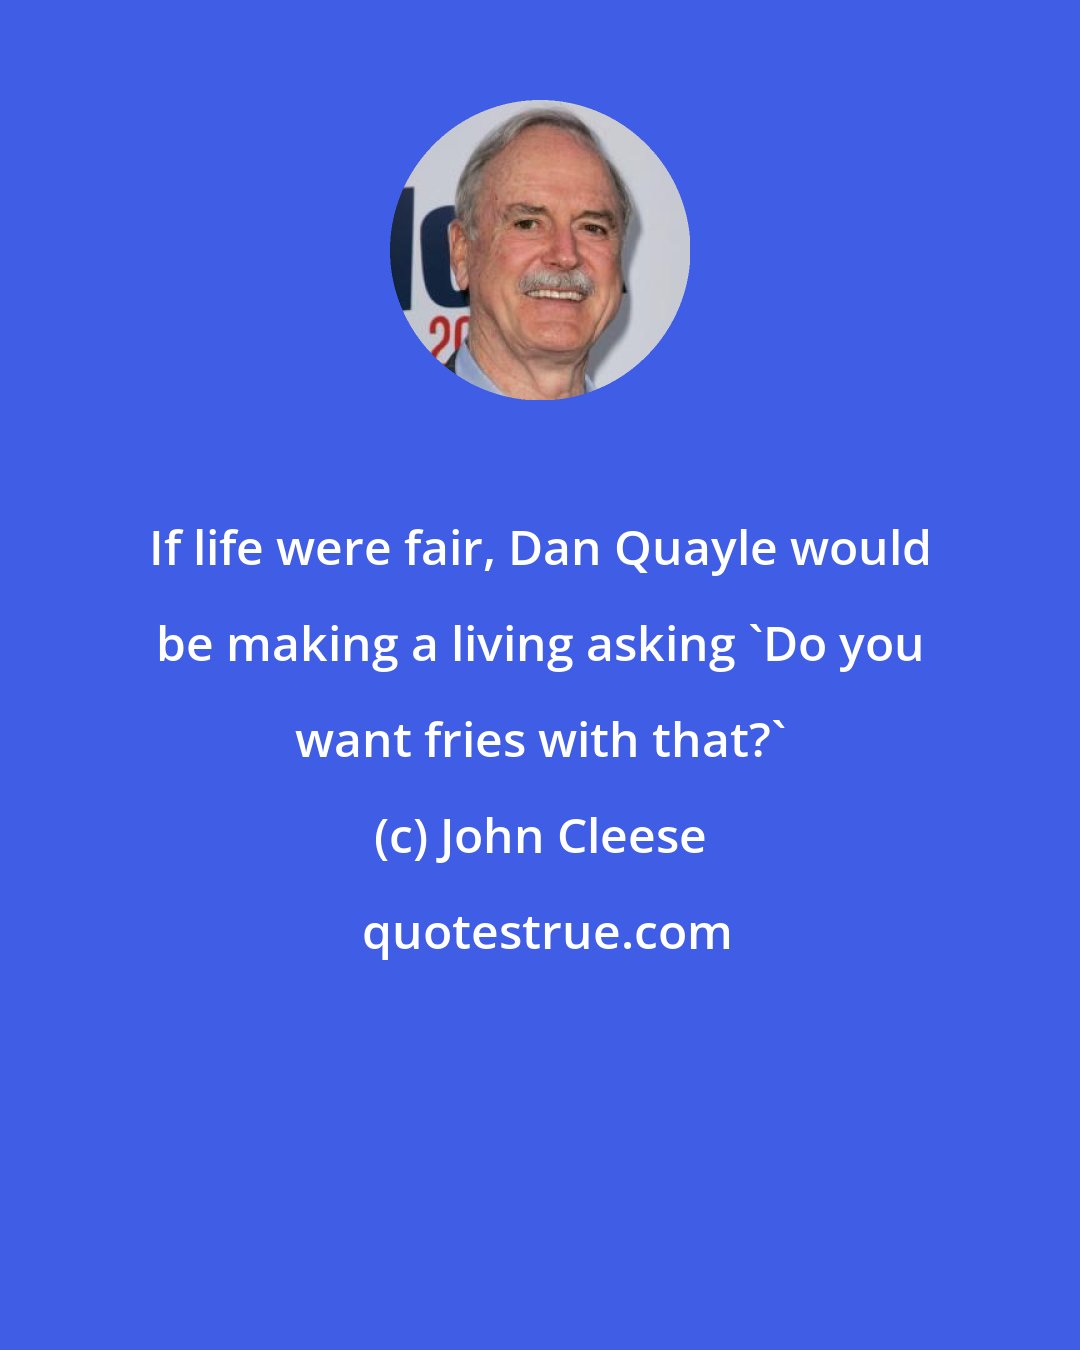 John Cleese: If life were fair, Dan Quayle would be making a living asking 'Do you want fries with that?'